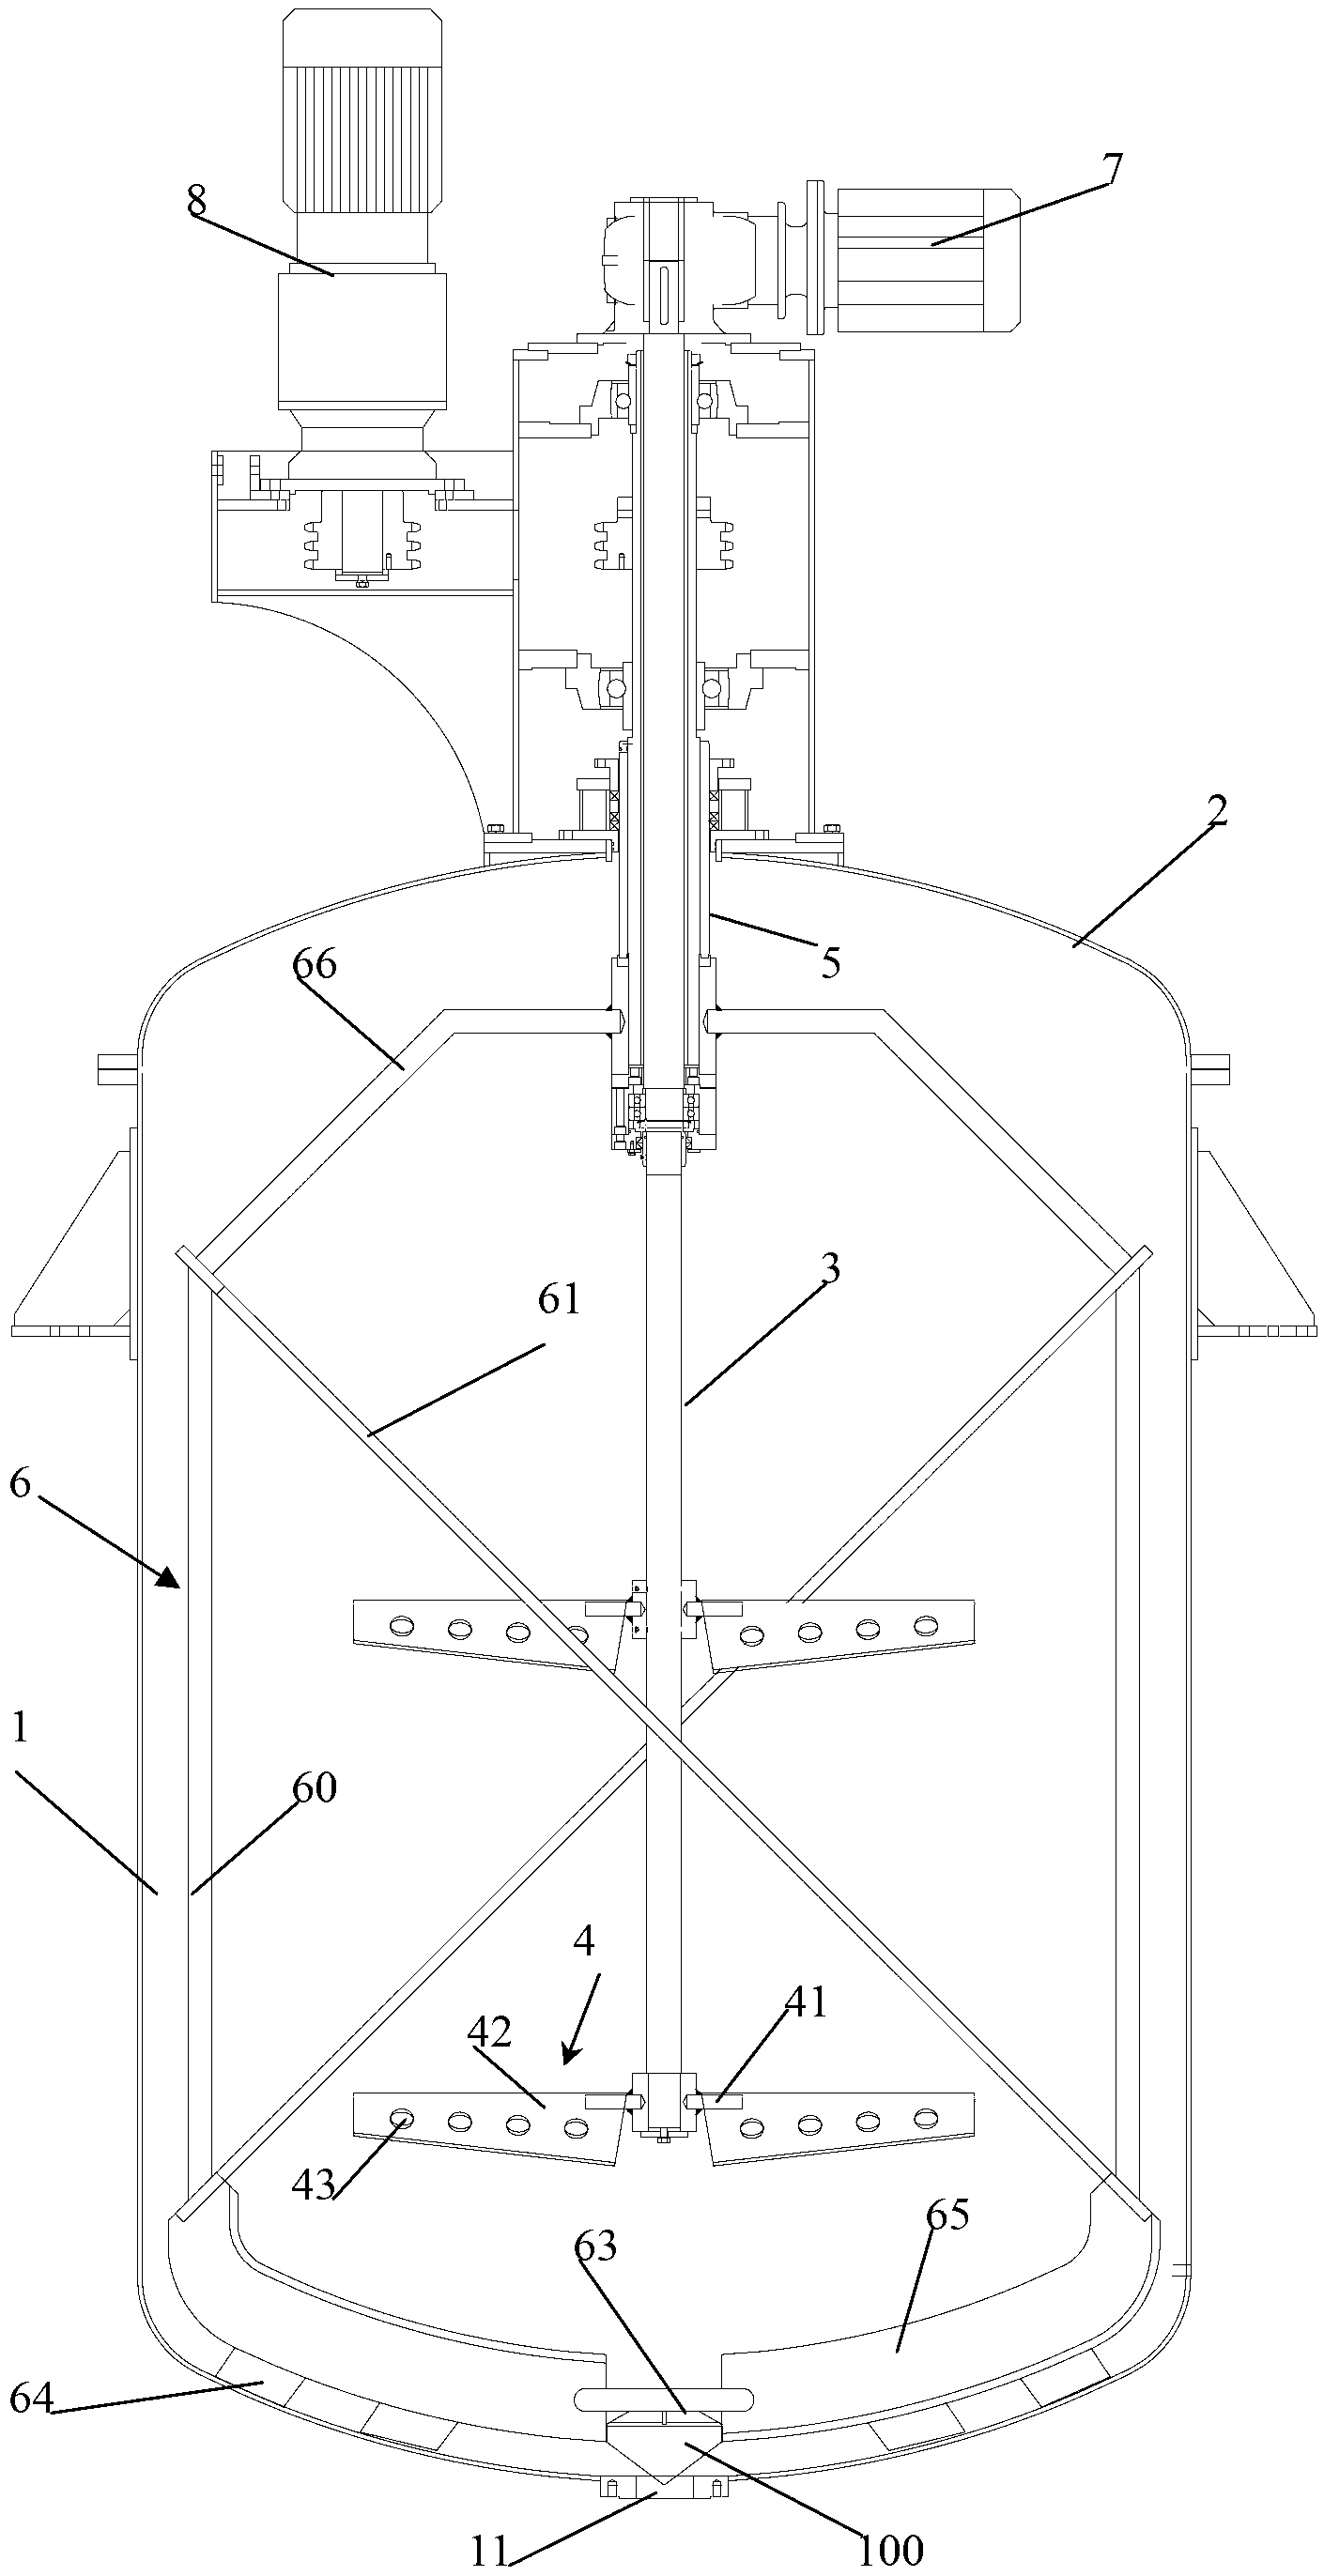 Double-stirring type stirring tank capable of smoothly discharging materials